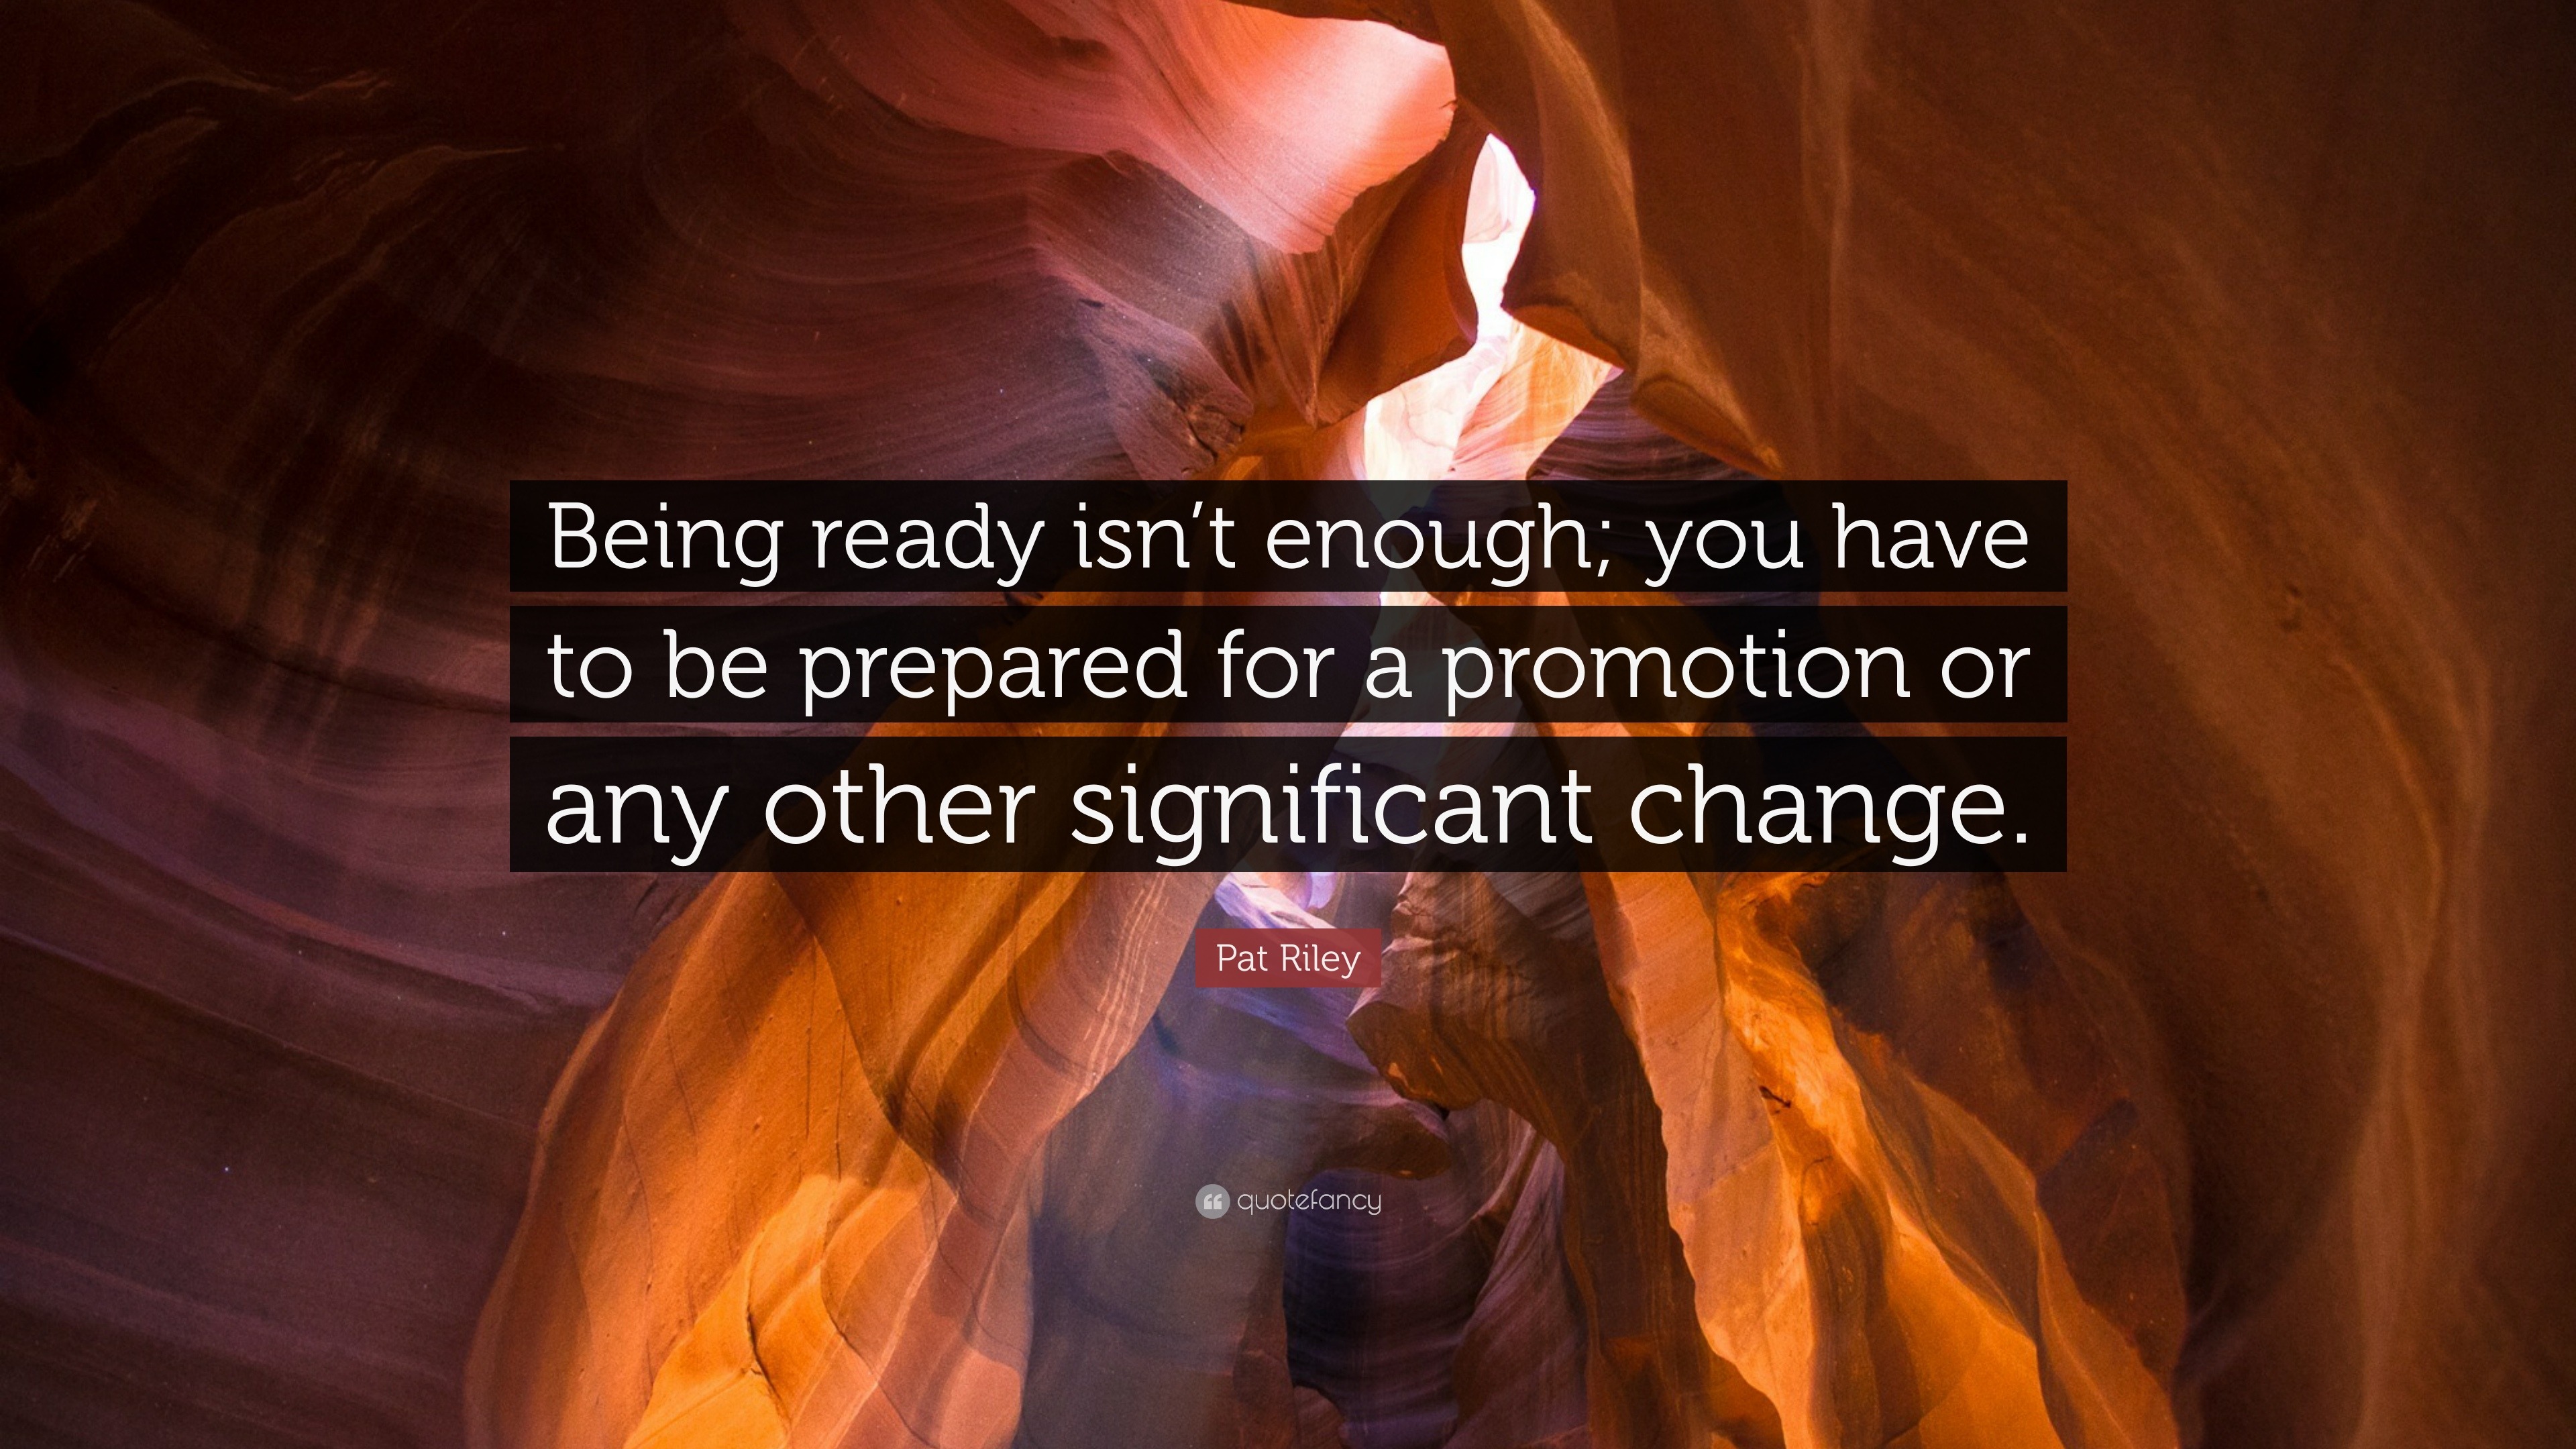 Pat Riley Quote: “Being ready isn’t enough; you have to be prepared for